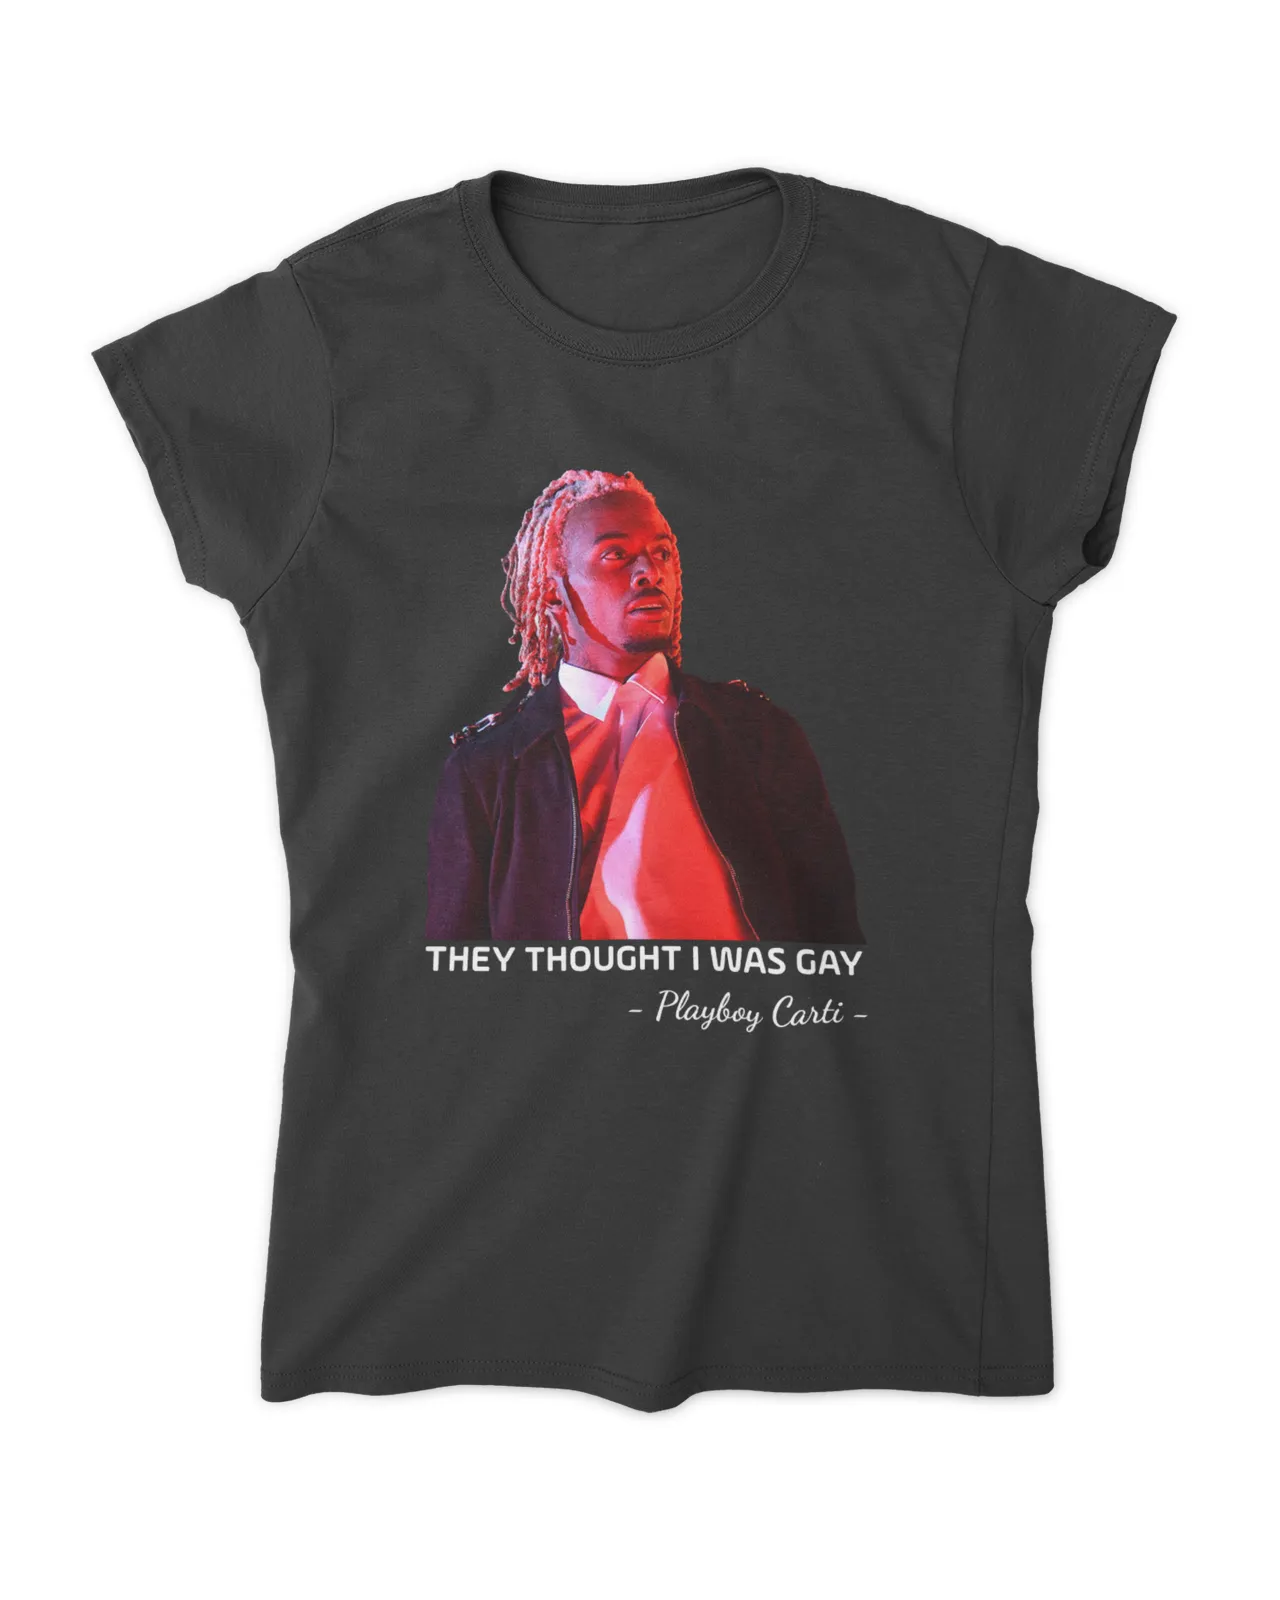 They Thought I Was Gay Shirt